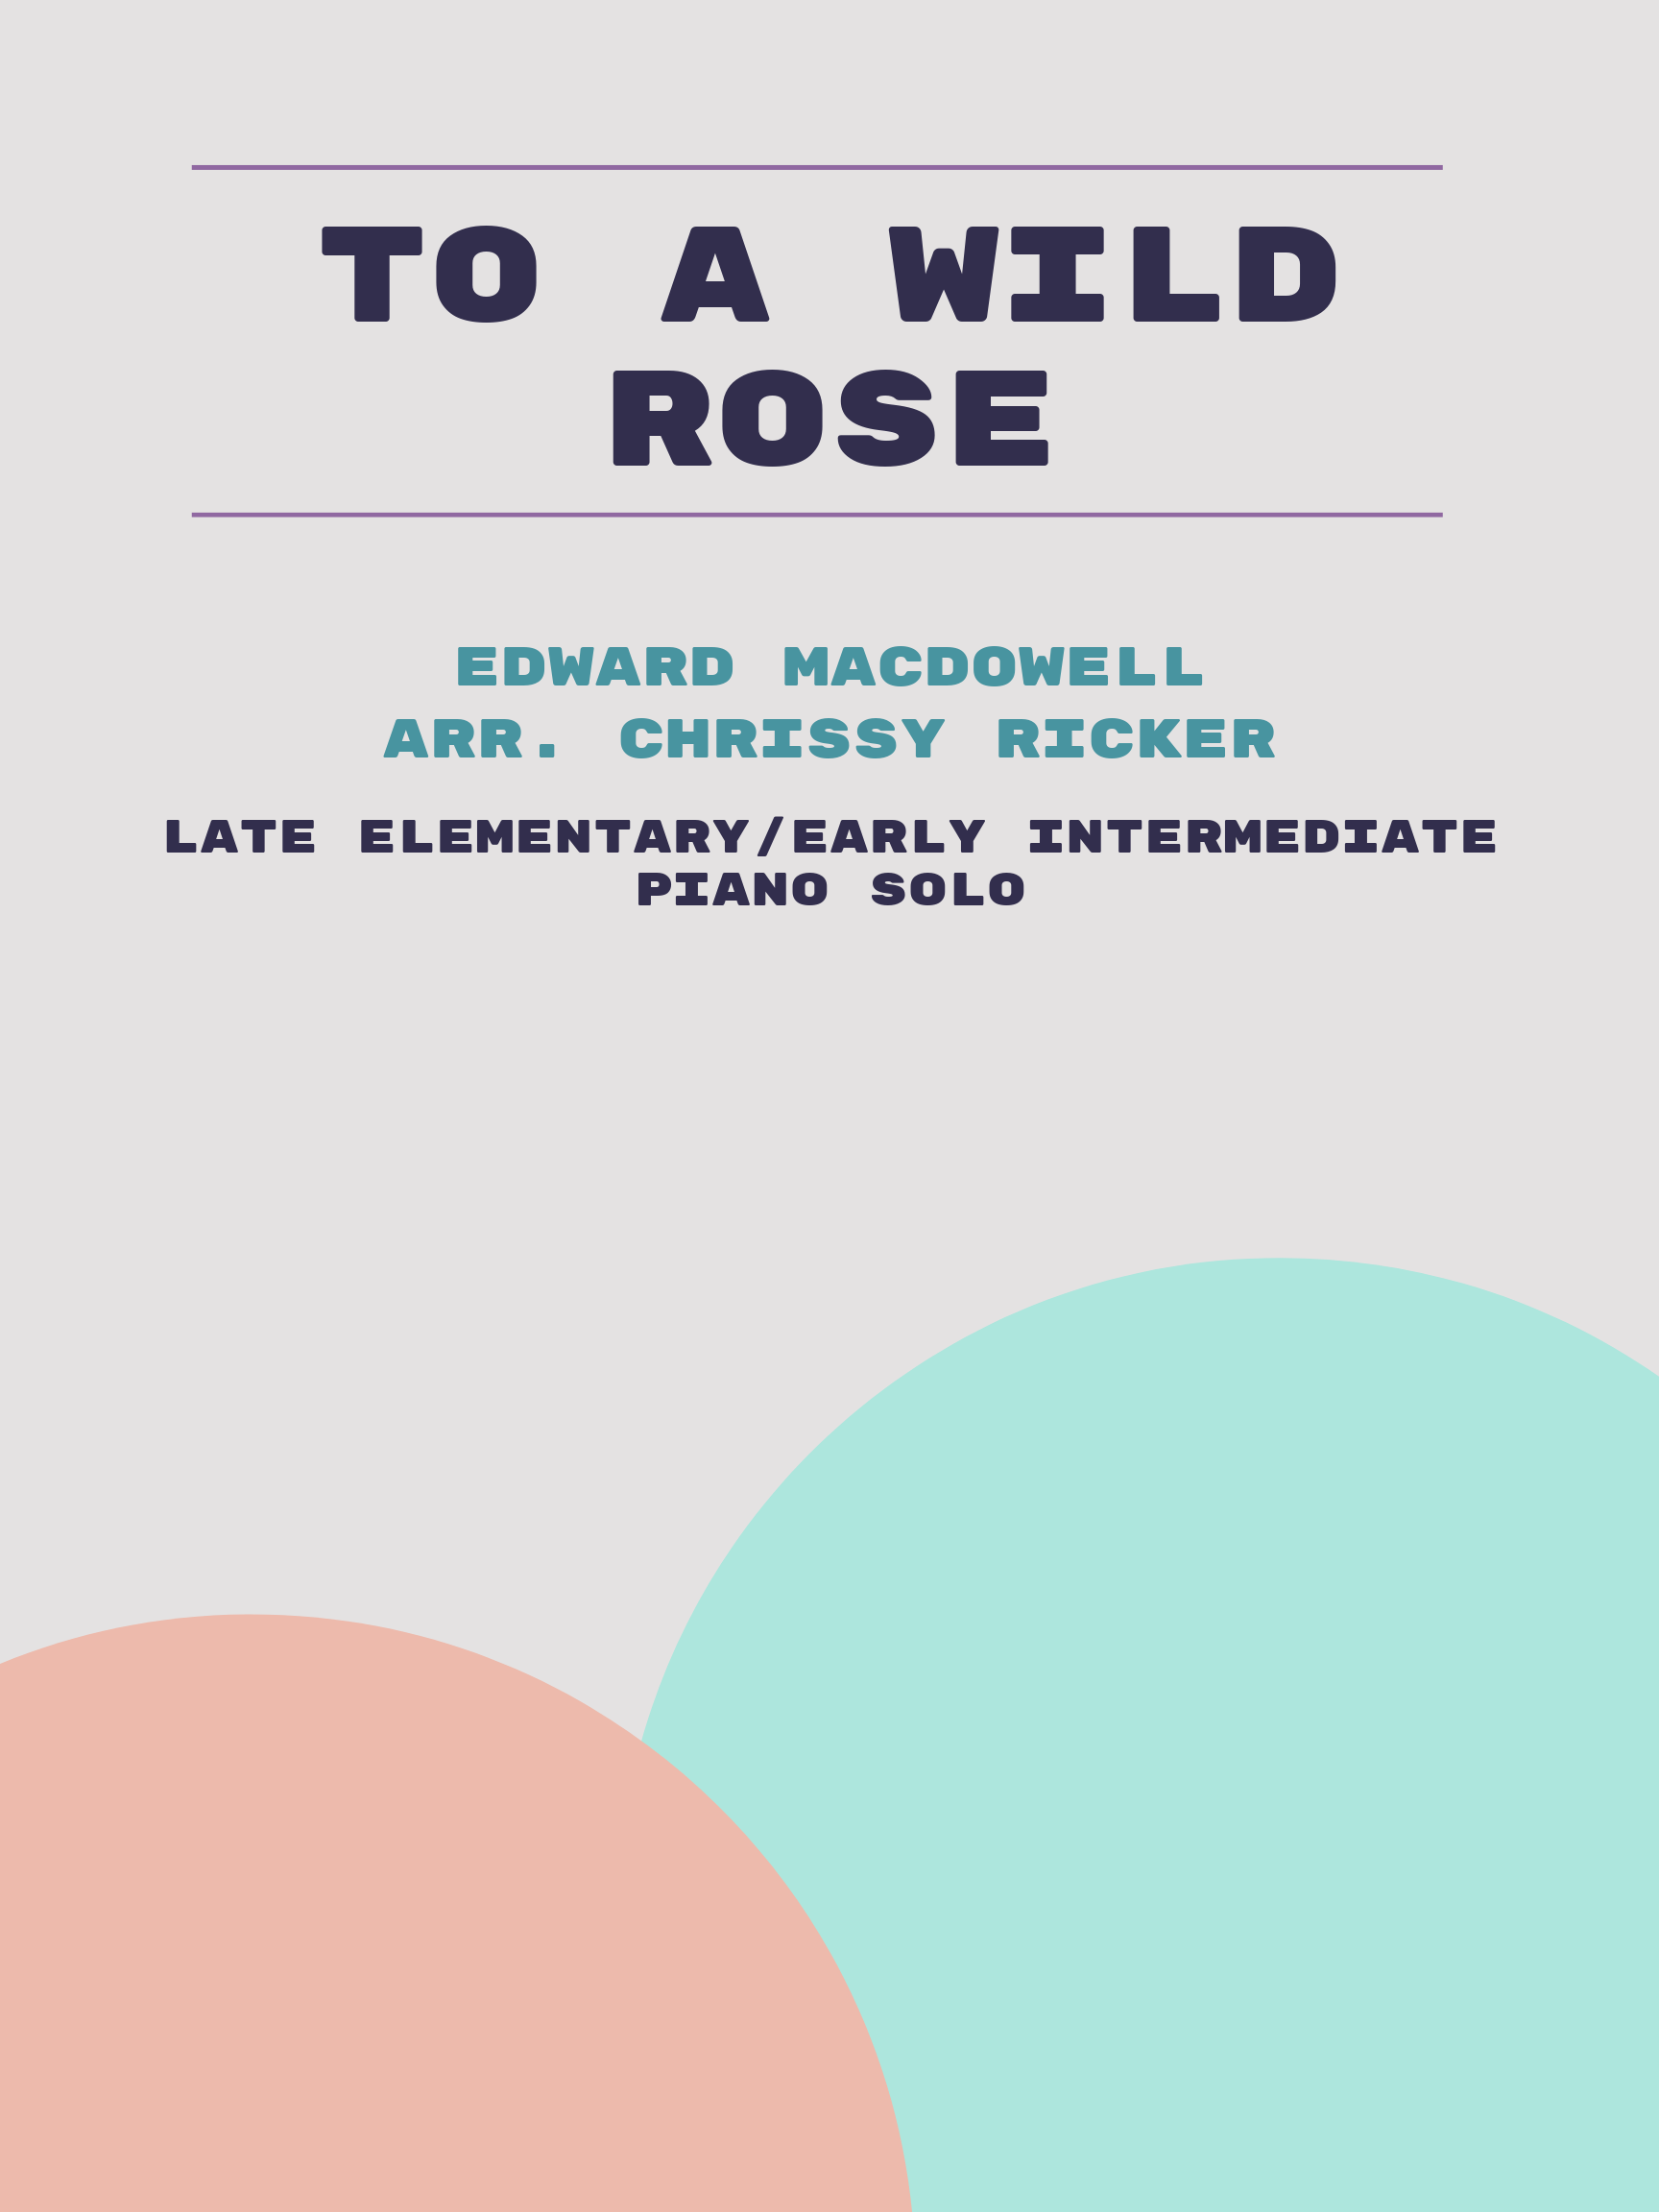 To a Wild Rose by Edward MacDowell